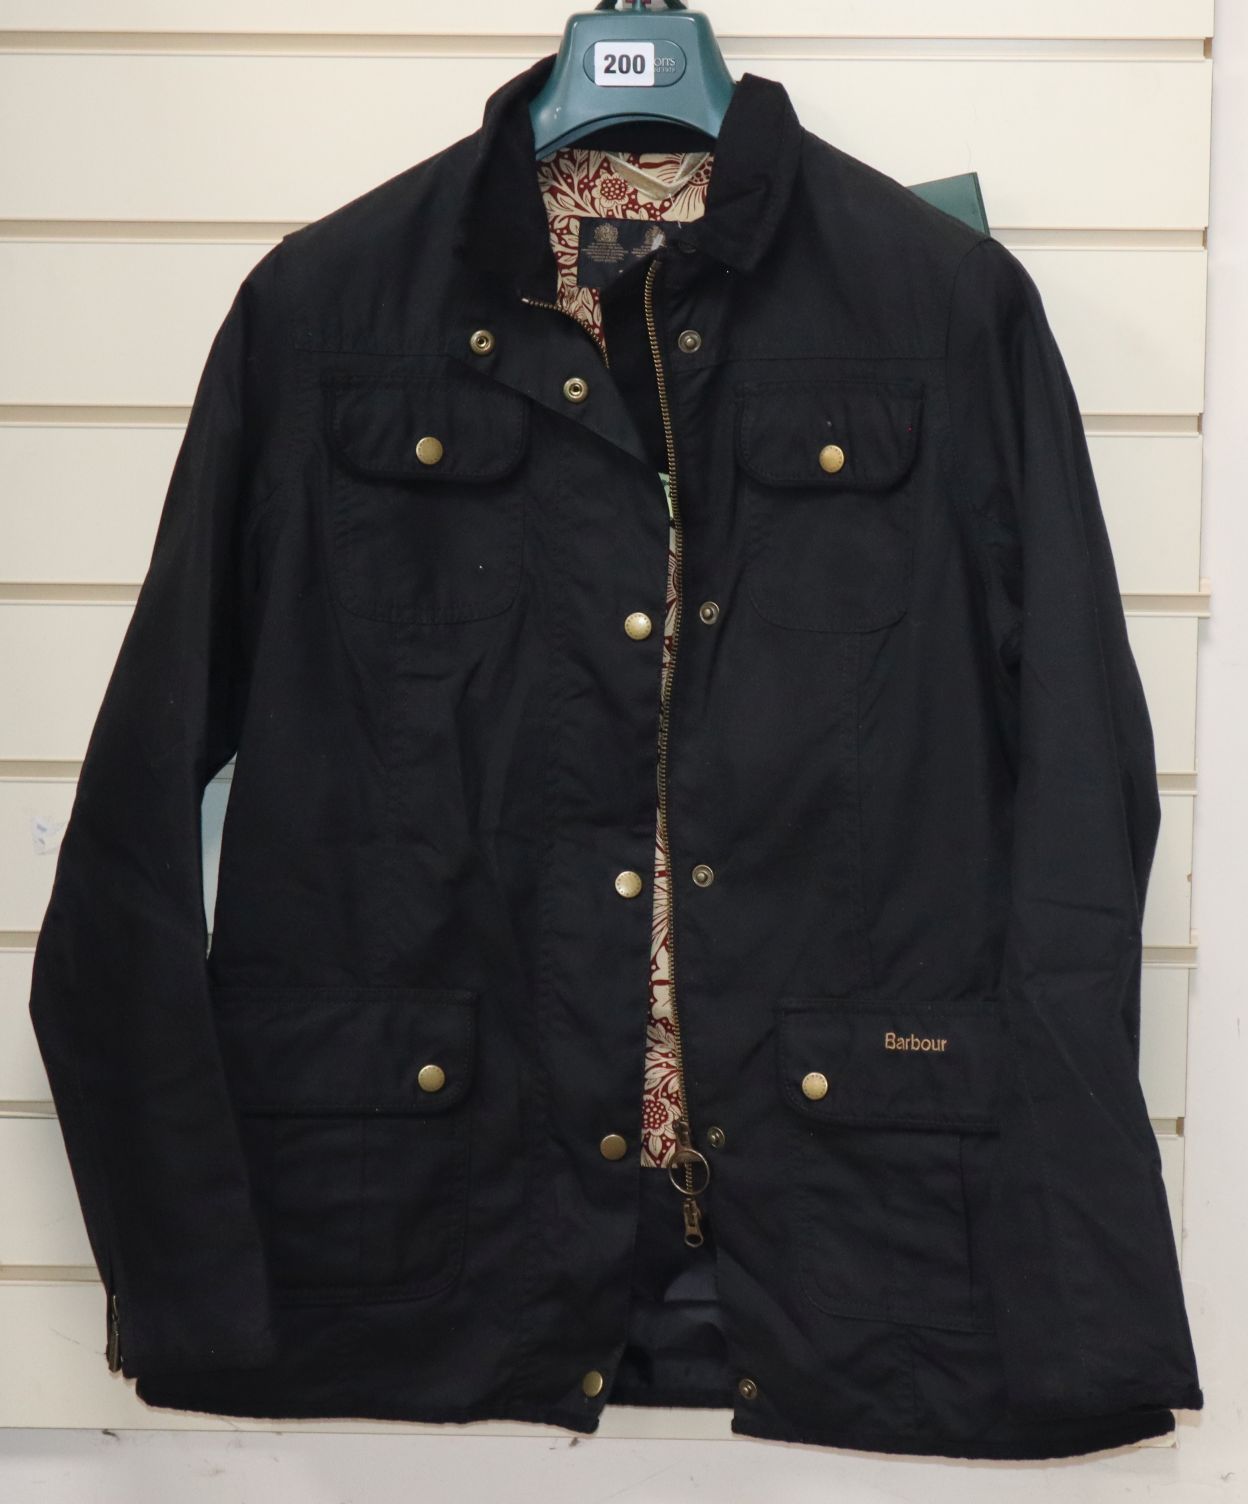 A new ladies Barbour black wax jacket with William Morris print lining, size 14